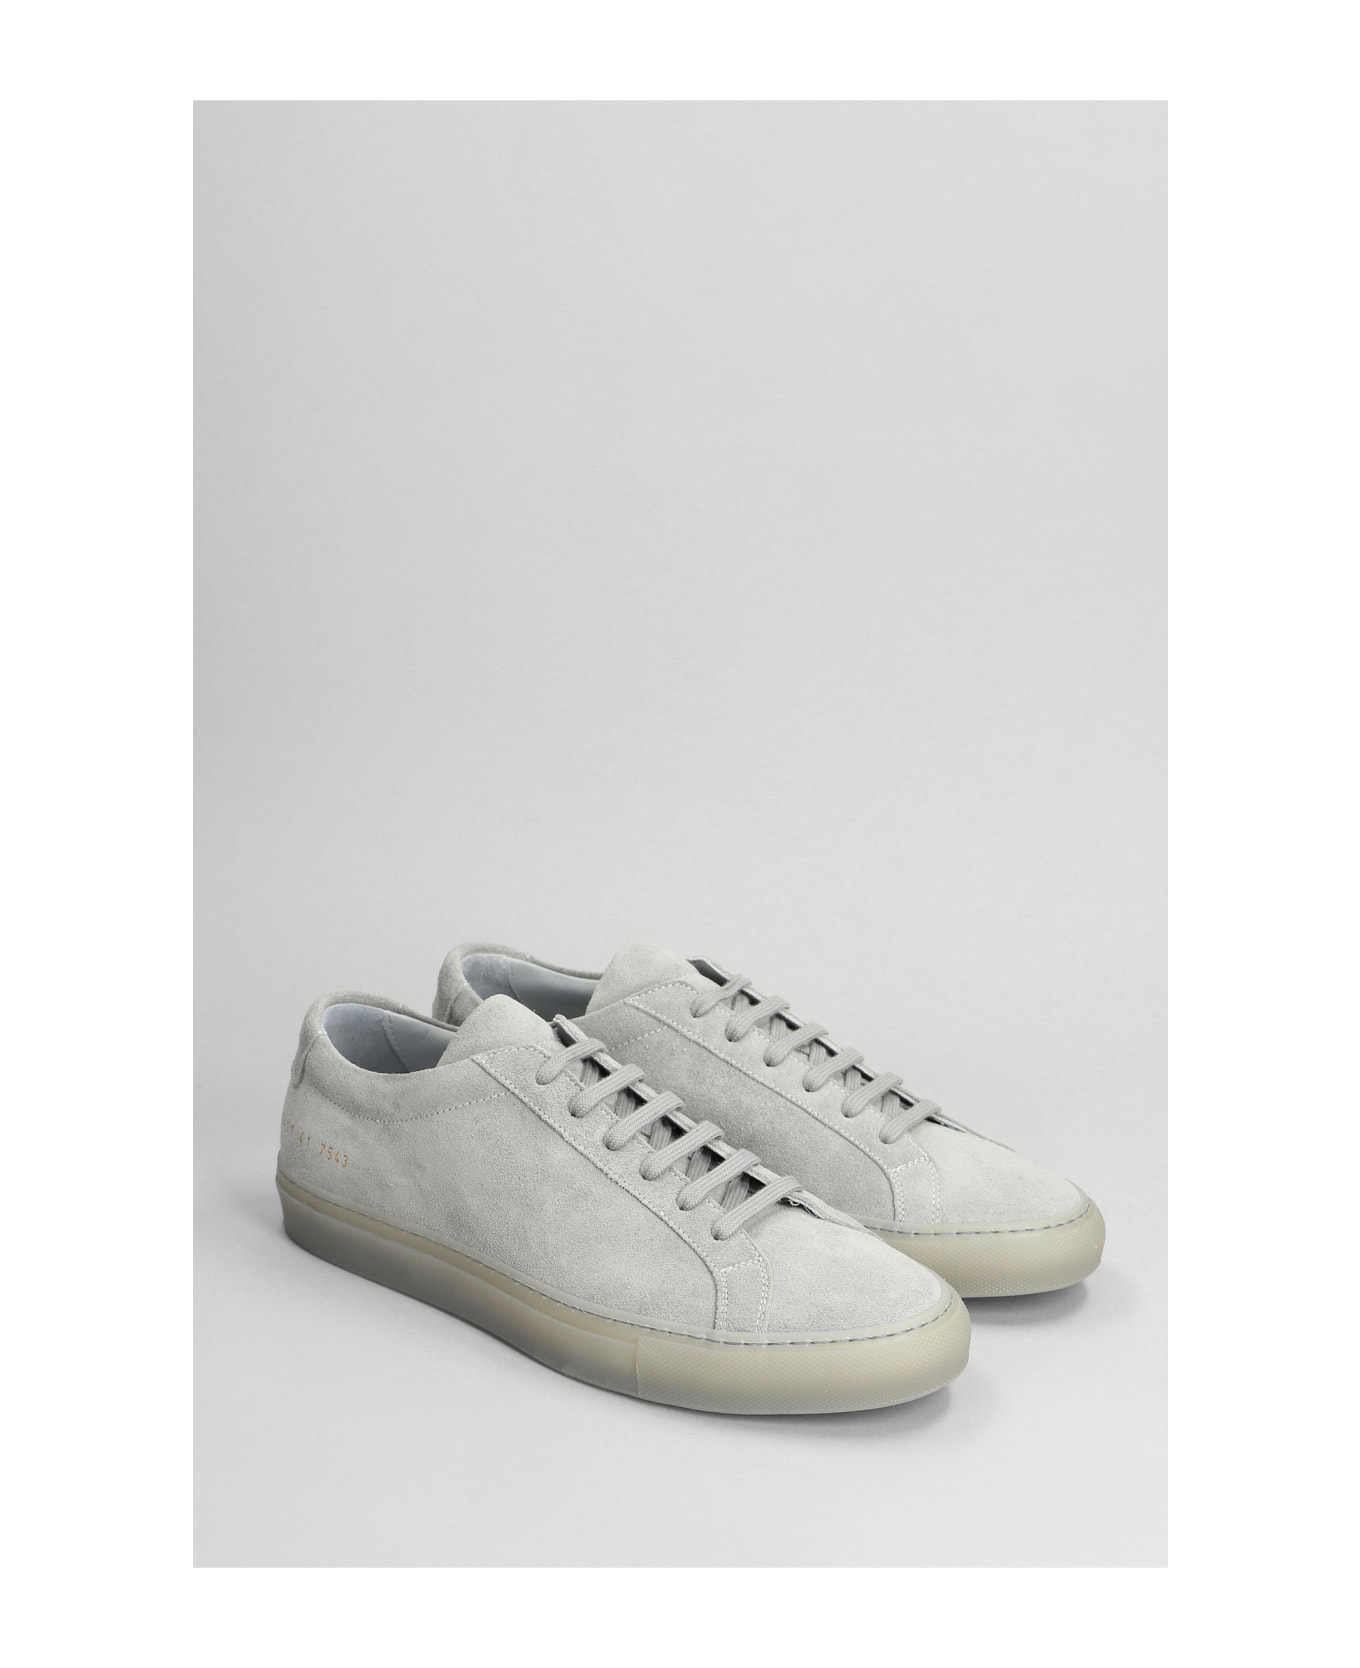 Common Projects Original Achilles Sneakers - grey